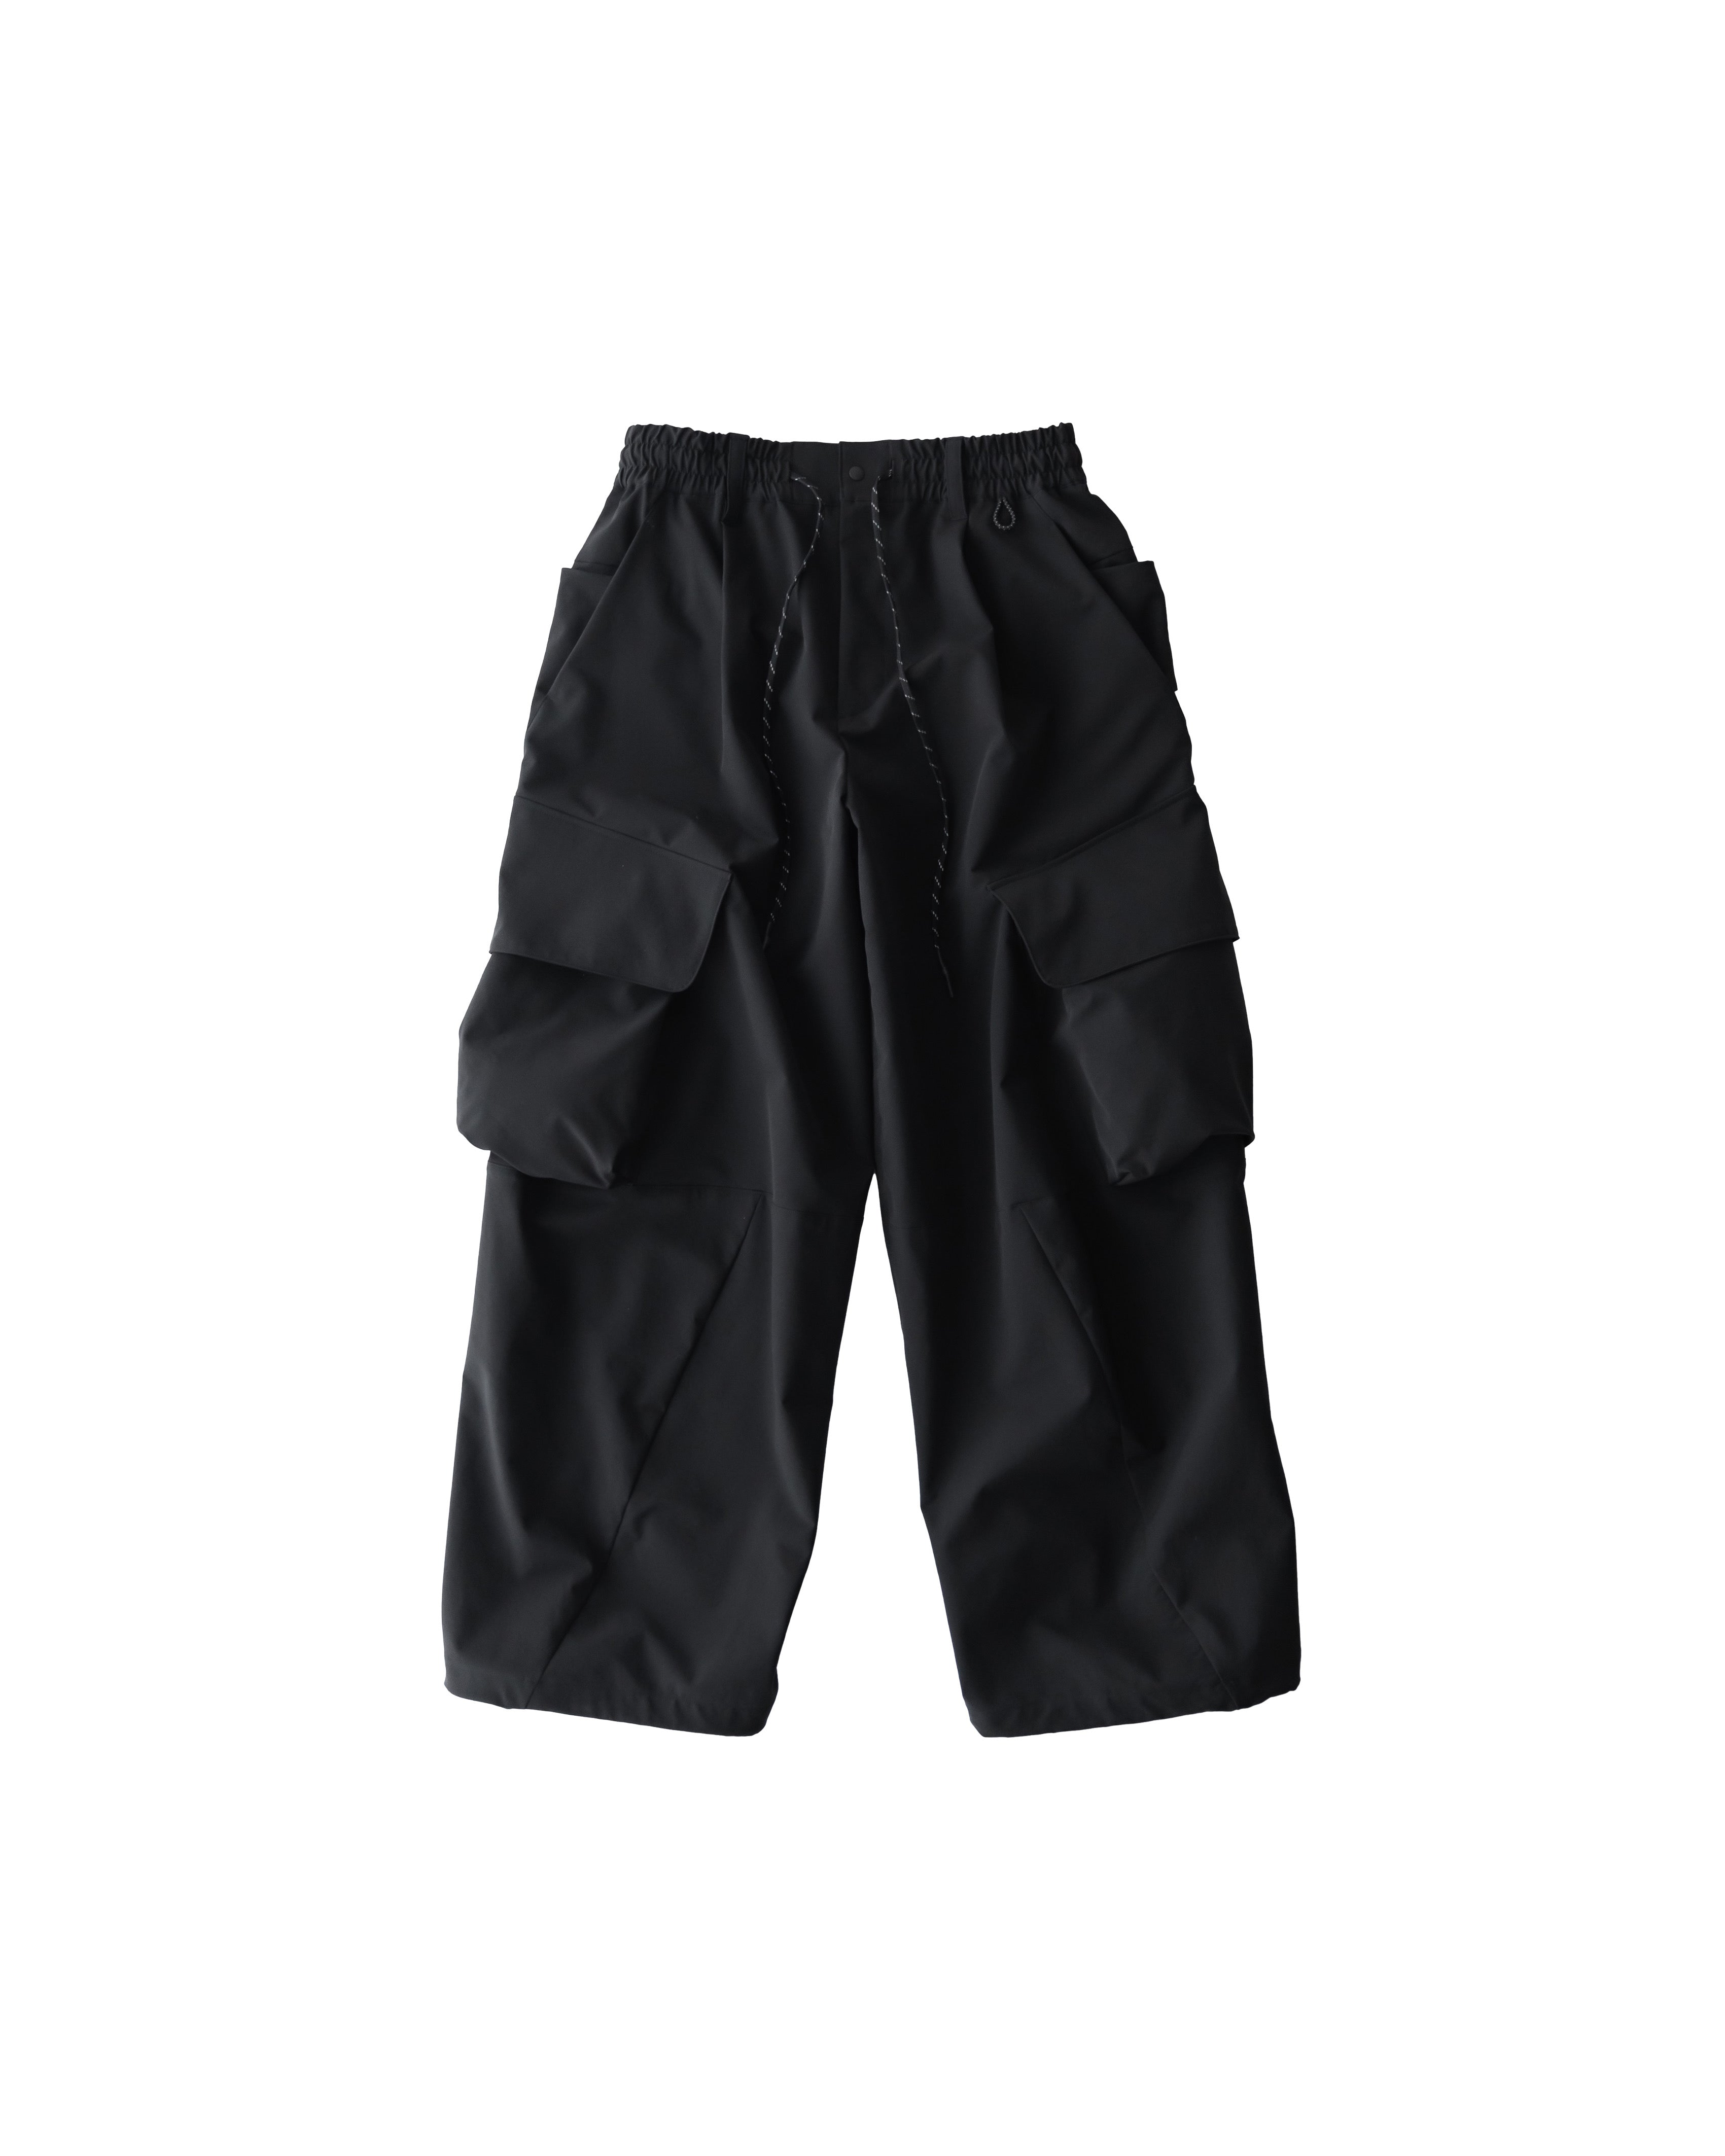 SOFT SHELL WIDE CAGO PANTS.